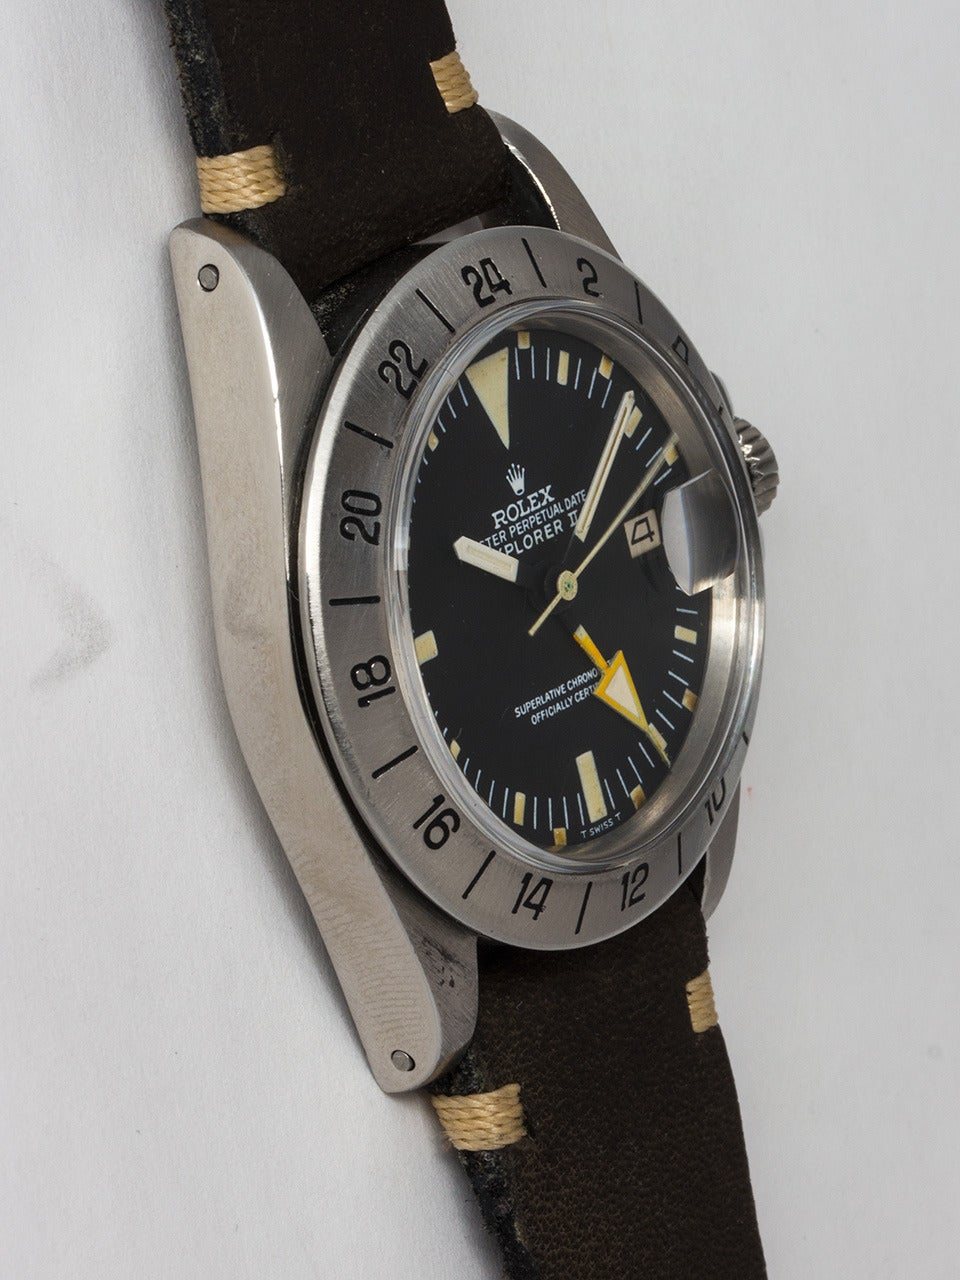 Rolex Stainless Steel Explorer II Wristwatch ref 1655 serial # 2.9 million circa 1971. 40mm diameter Oyster case with stainless steel 24 hour bezel and acrylic crystal. Very pleasing example with original matte black dial with patina'd luminous